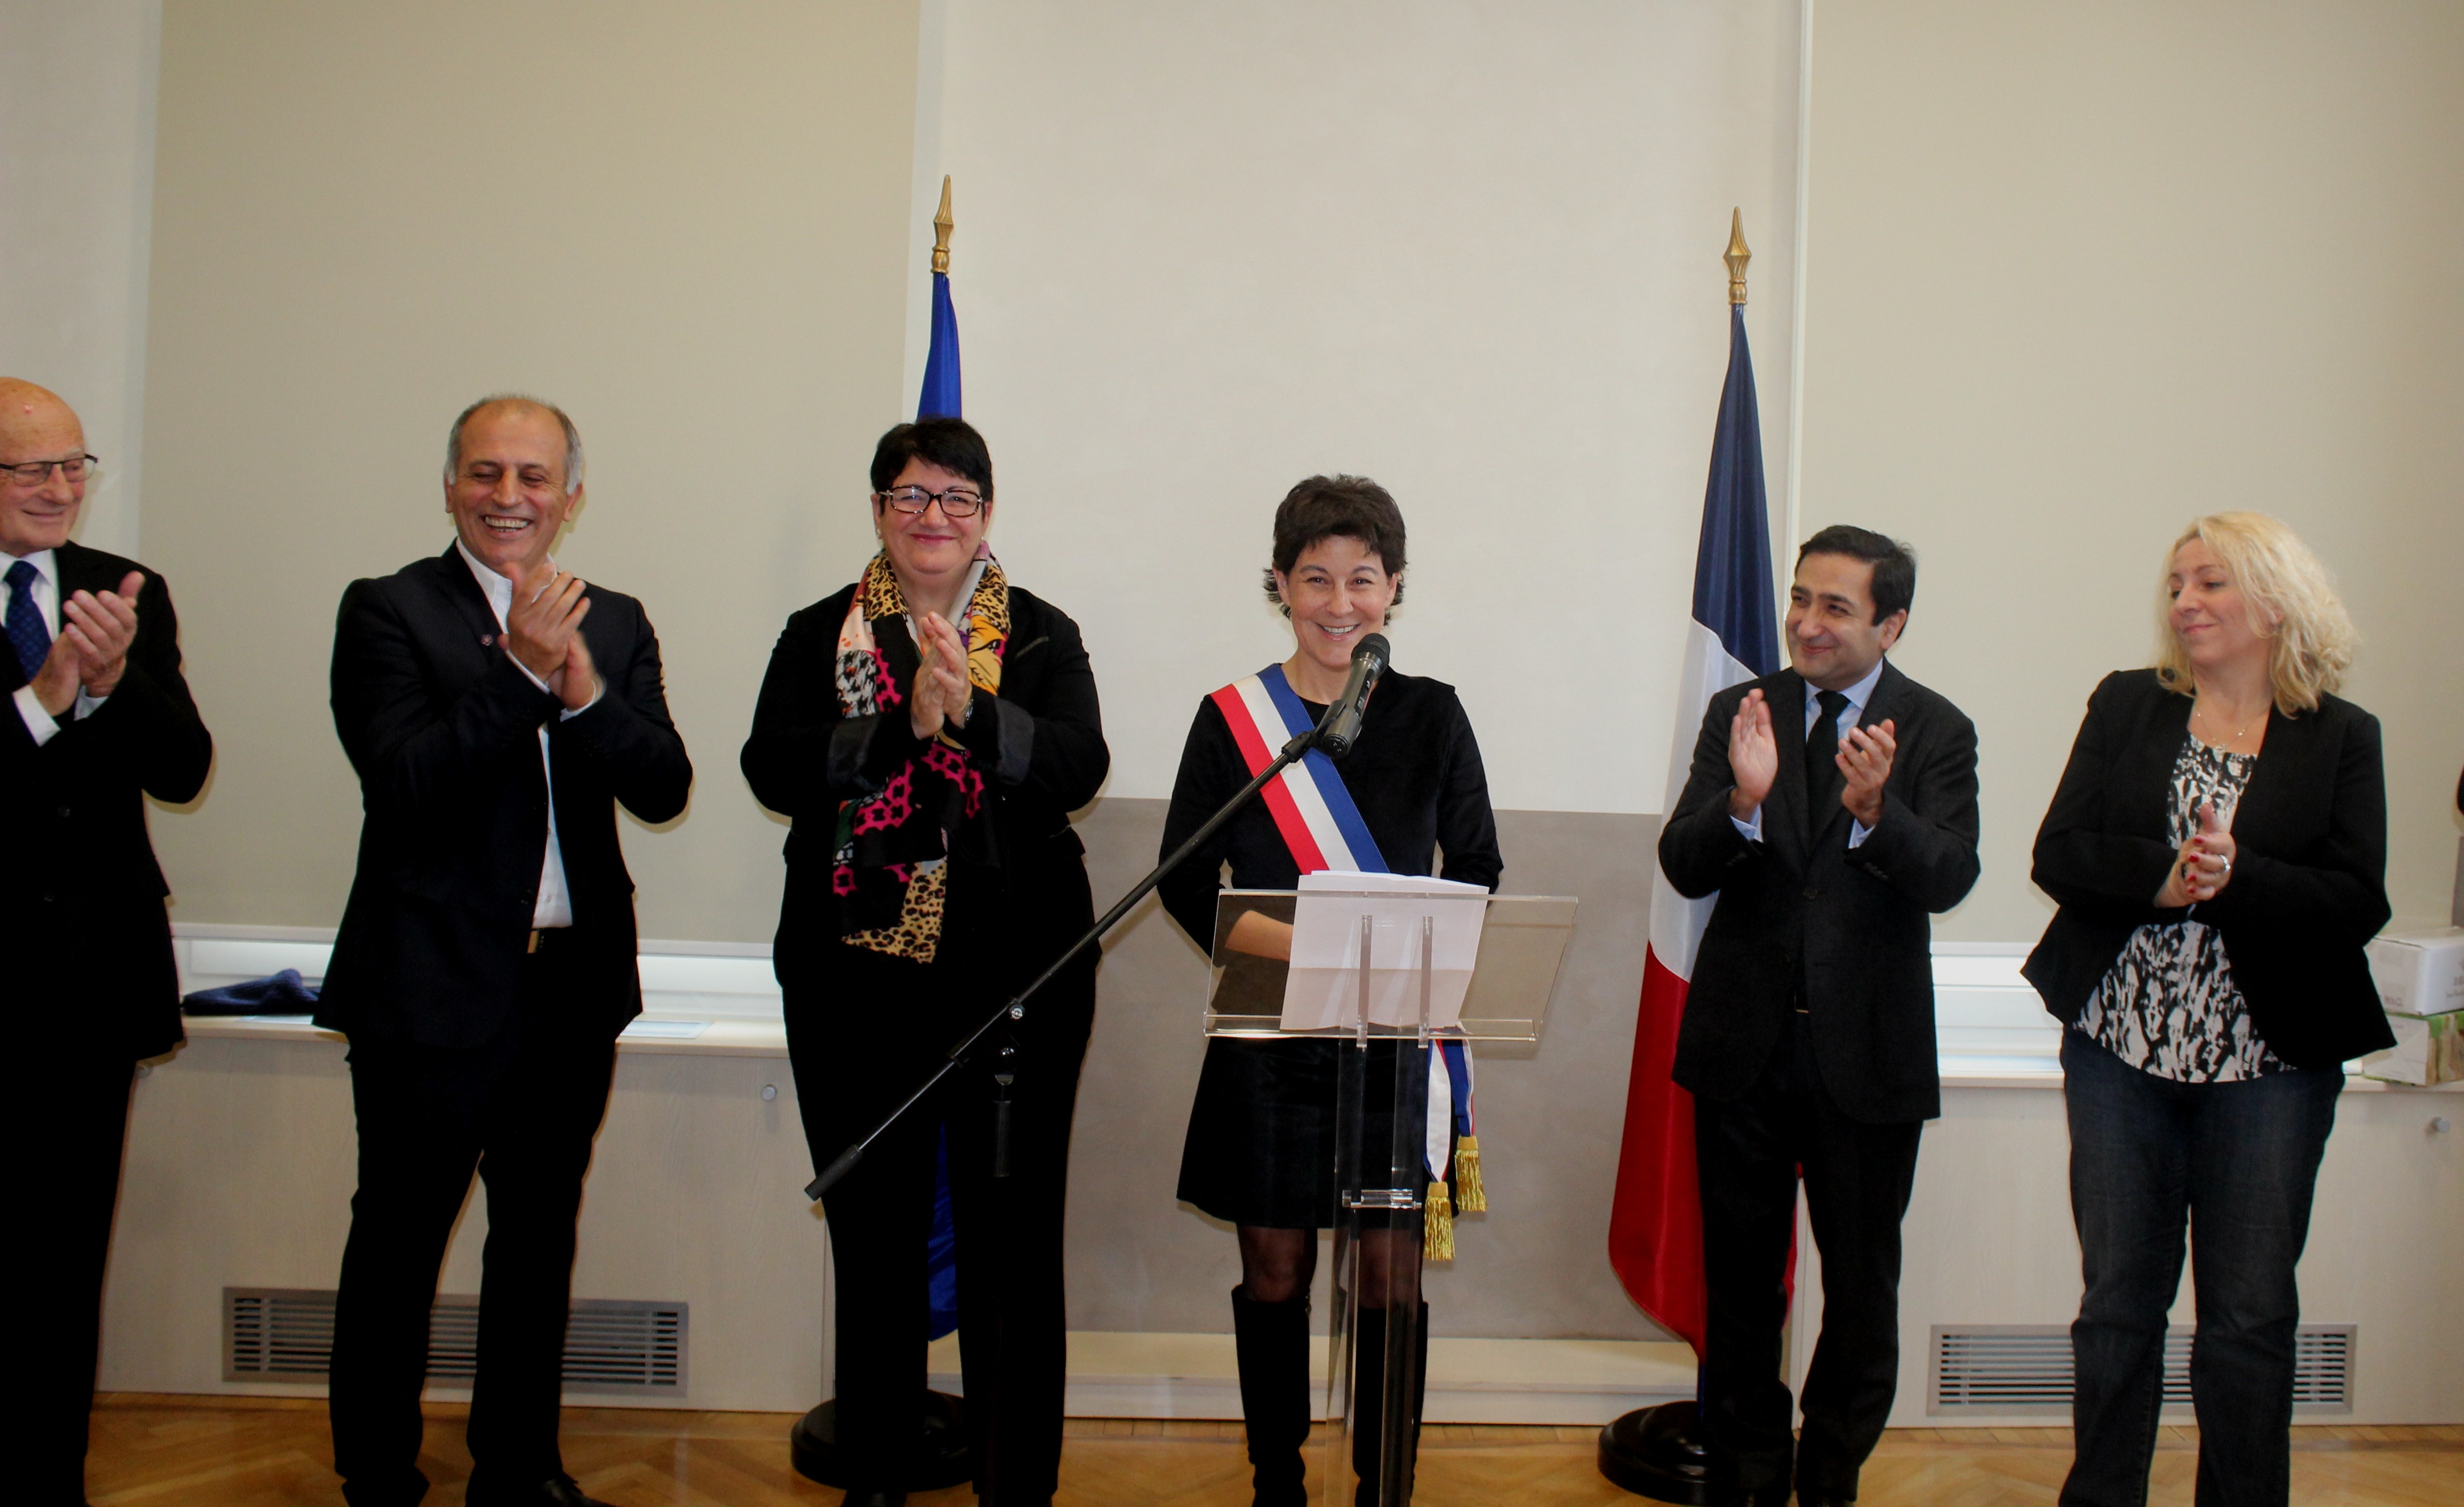 Permanent Representative of Artsakh to France Participated in Reception Held in Bourg-de-Peage City Hall